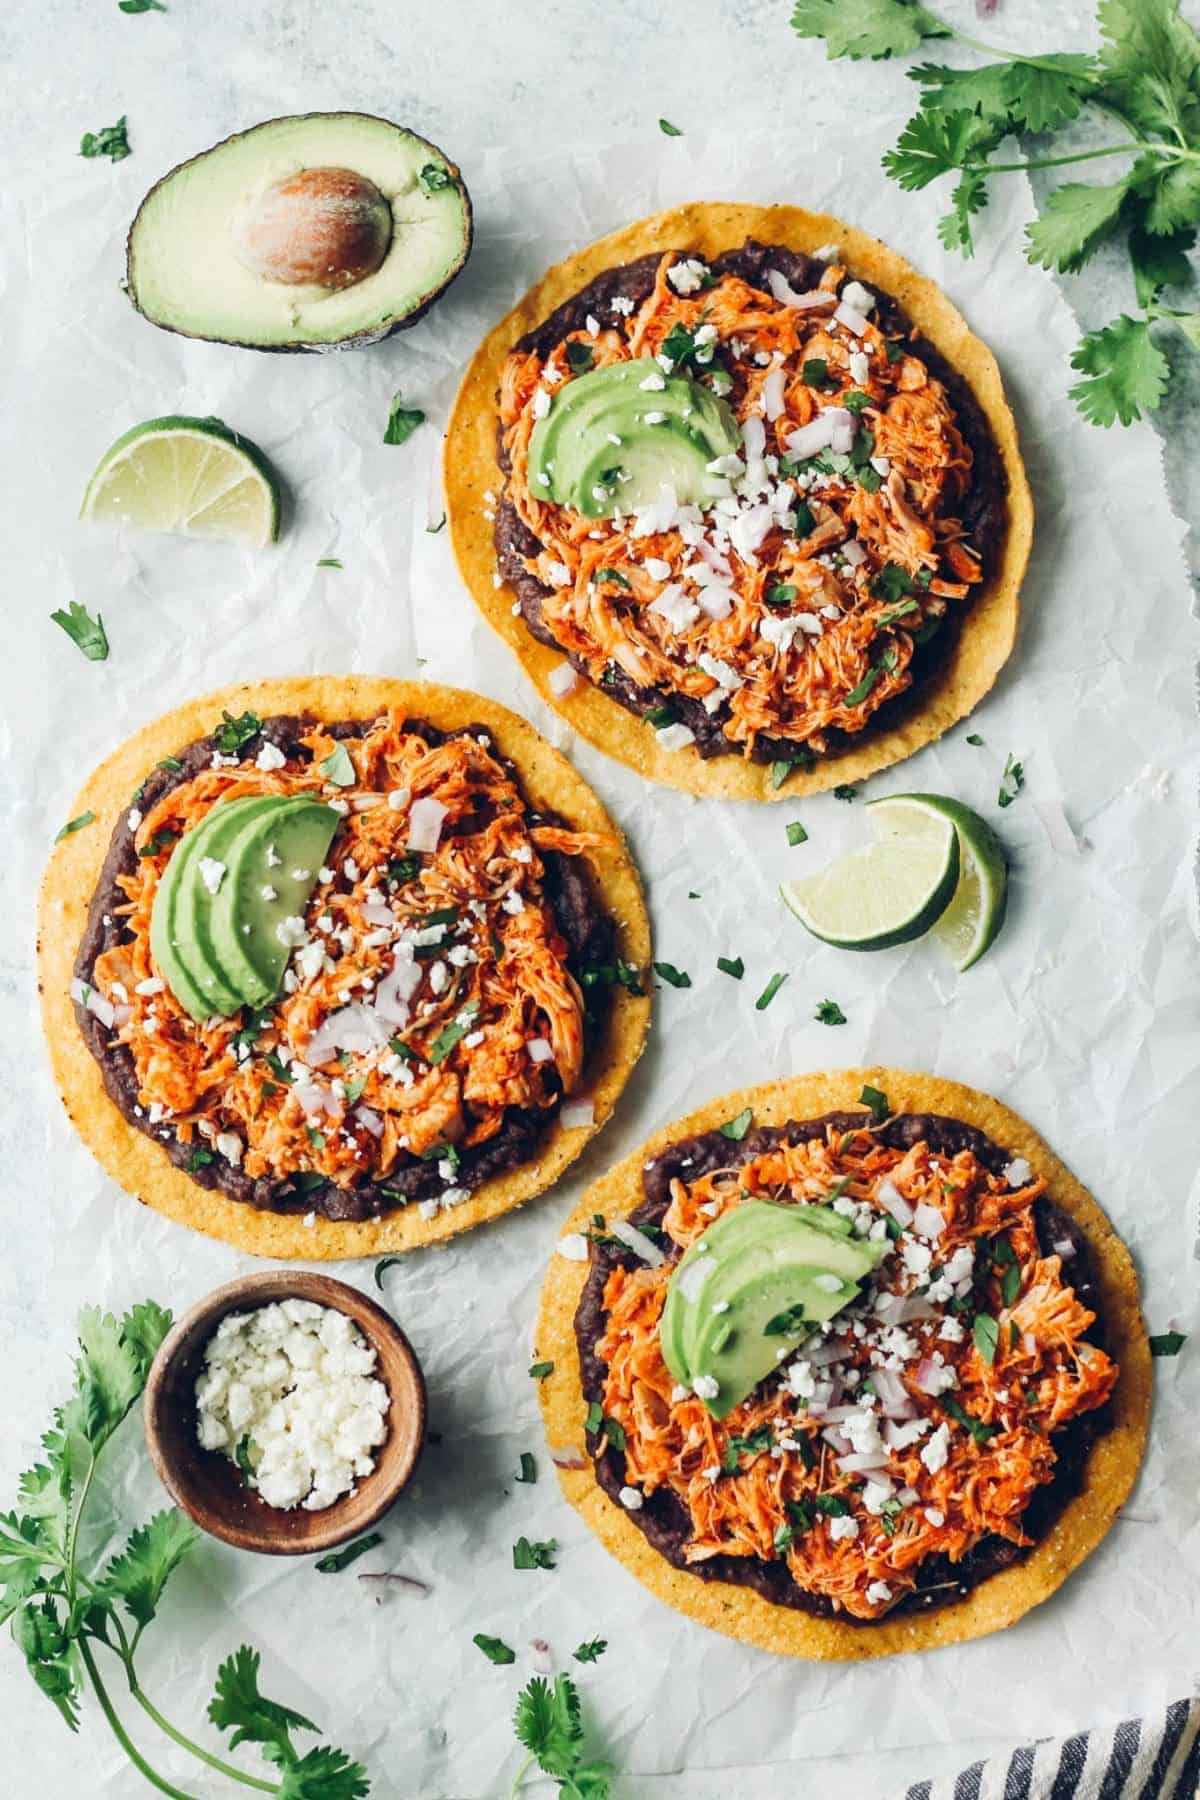 Chicken tinga served on tostadas with refried beans